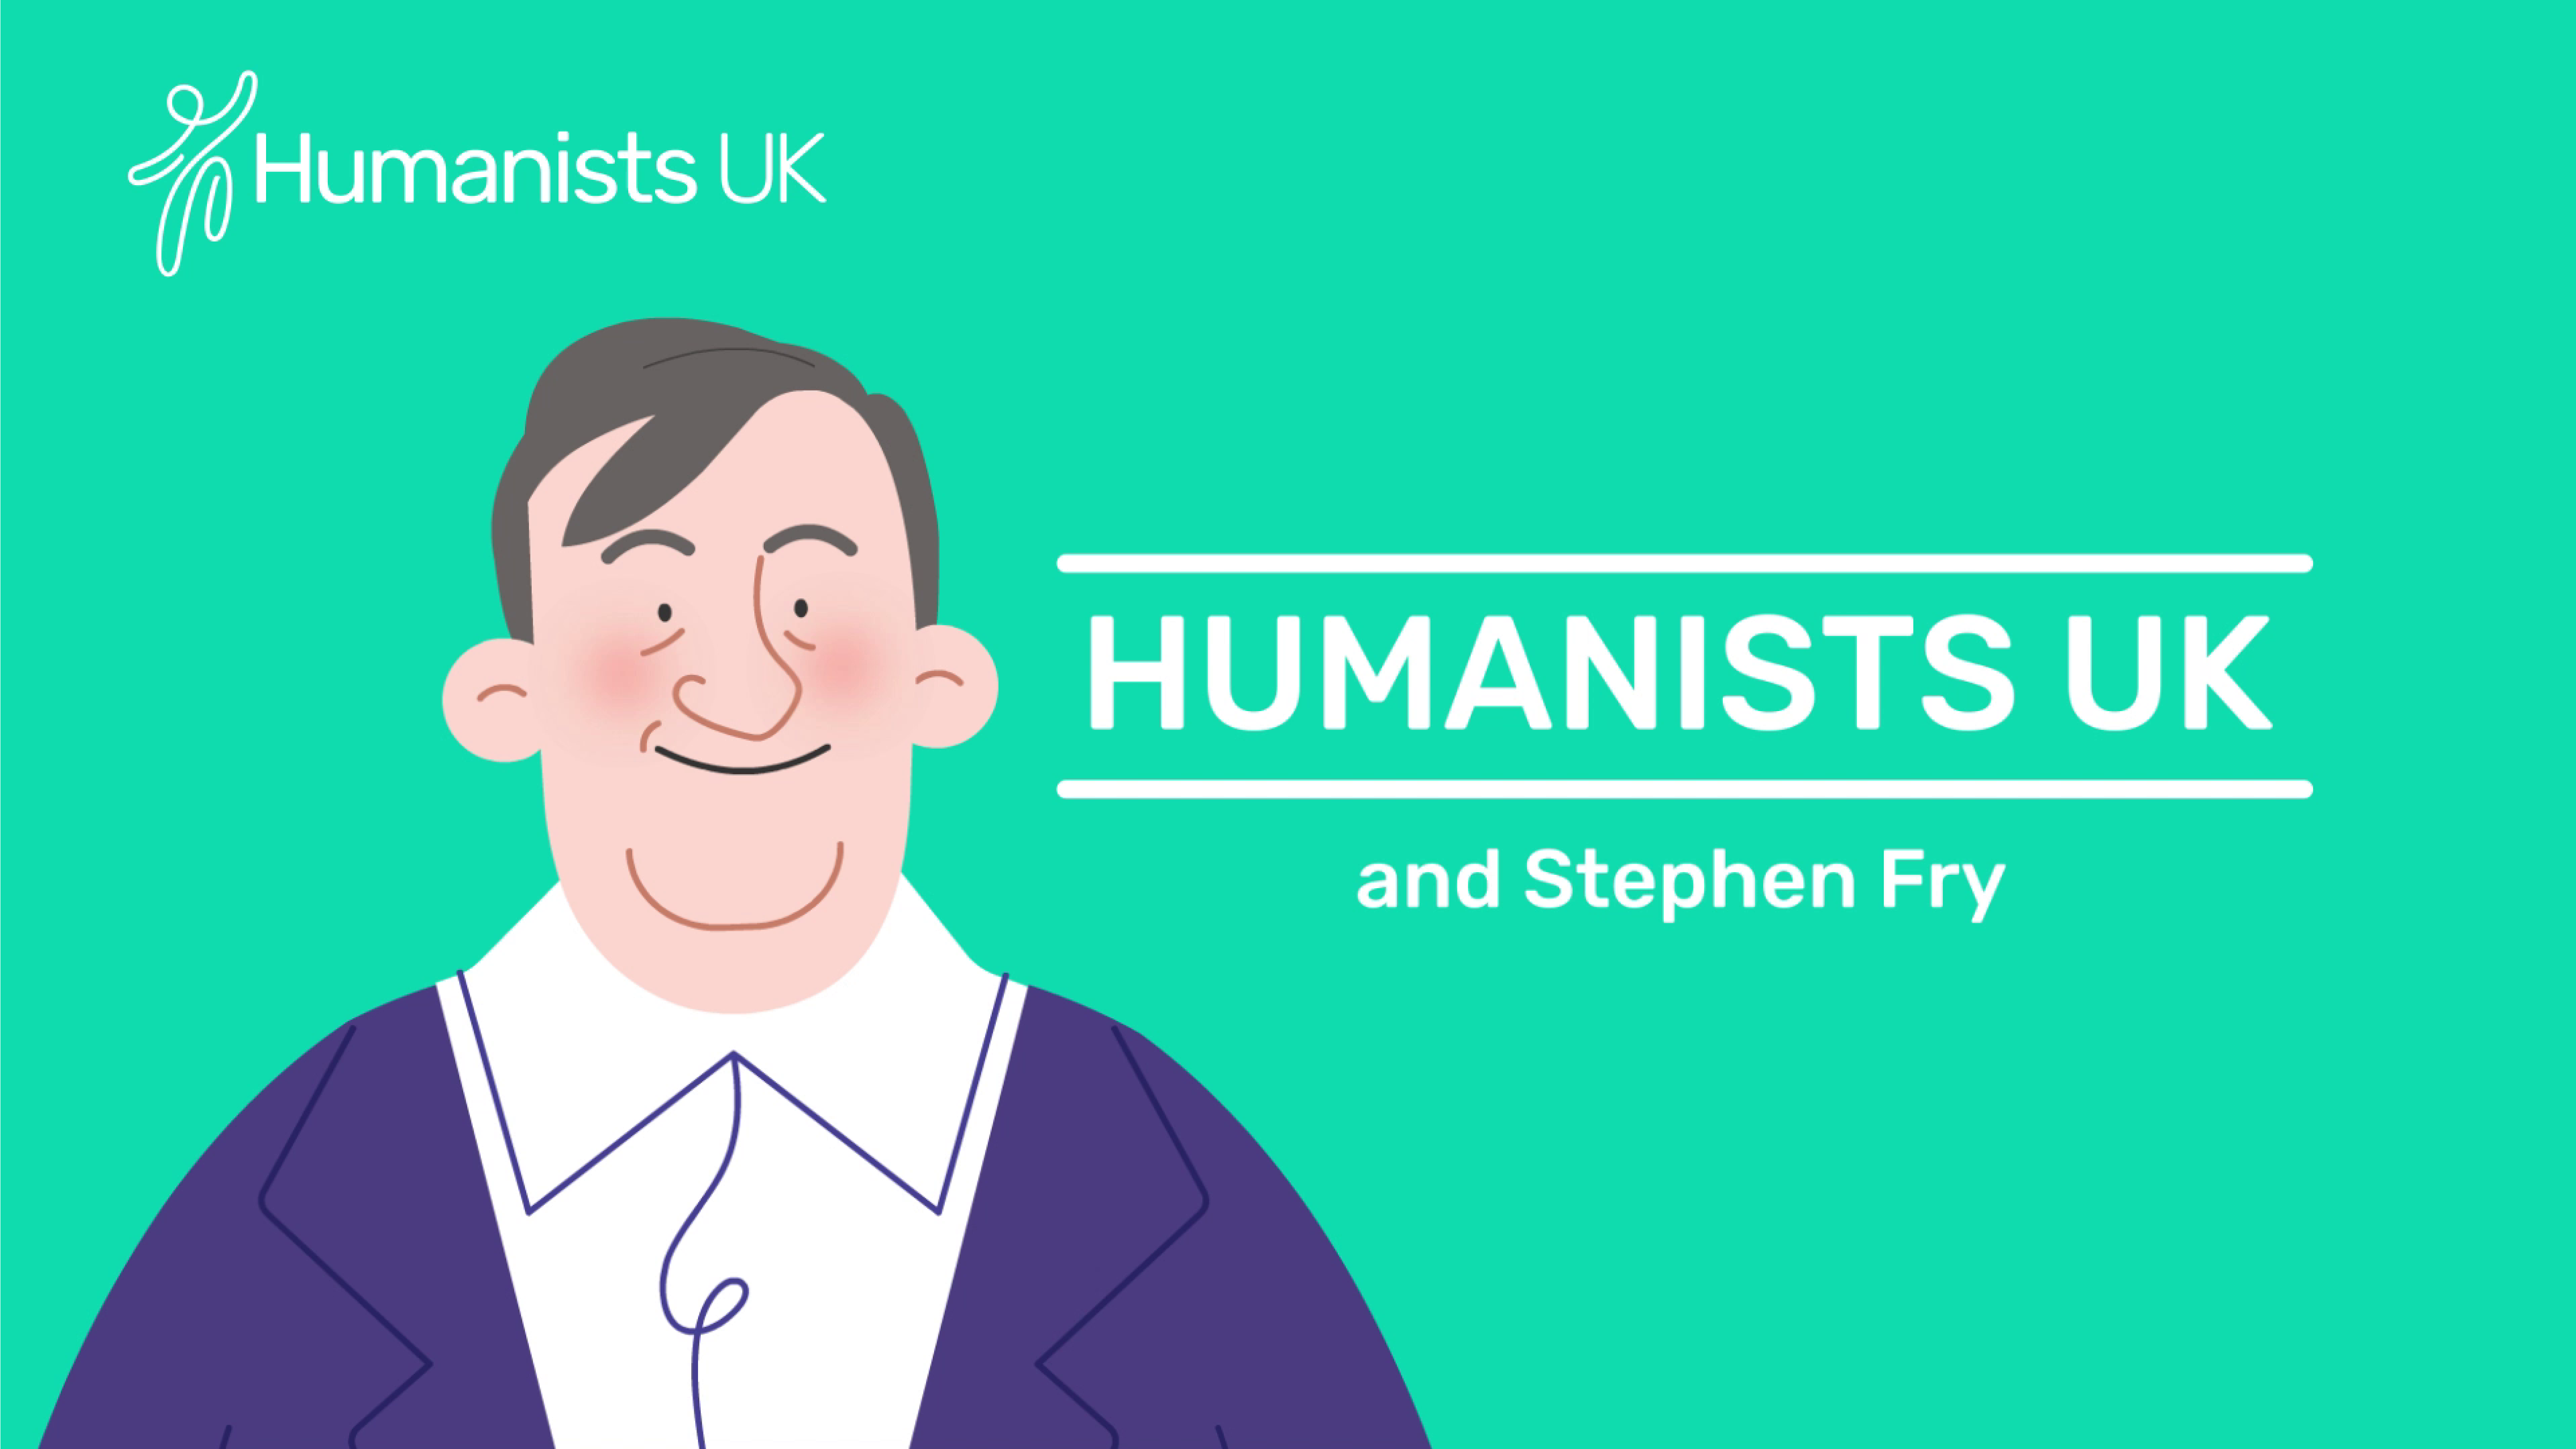 Humanists UK feature image (by Emilia Schneider)